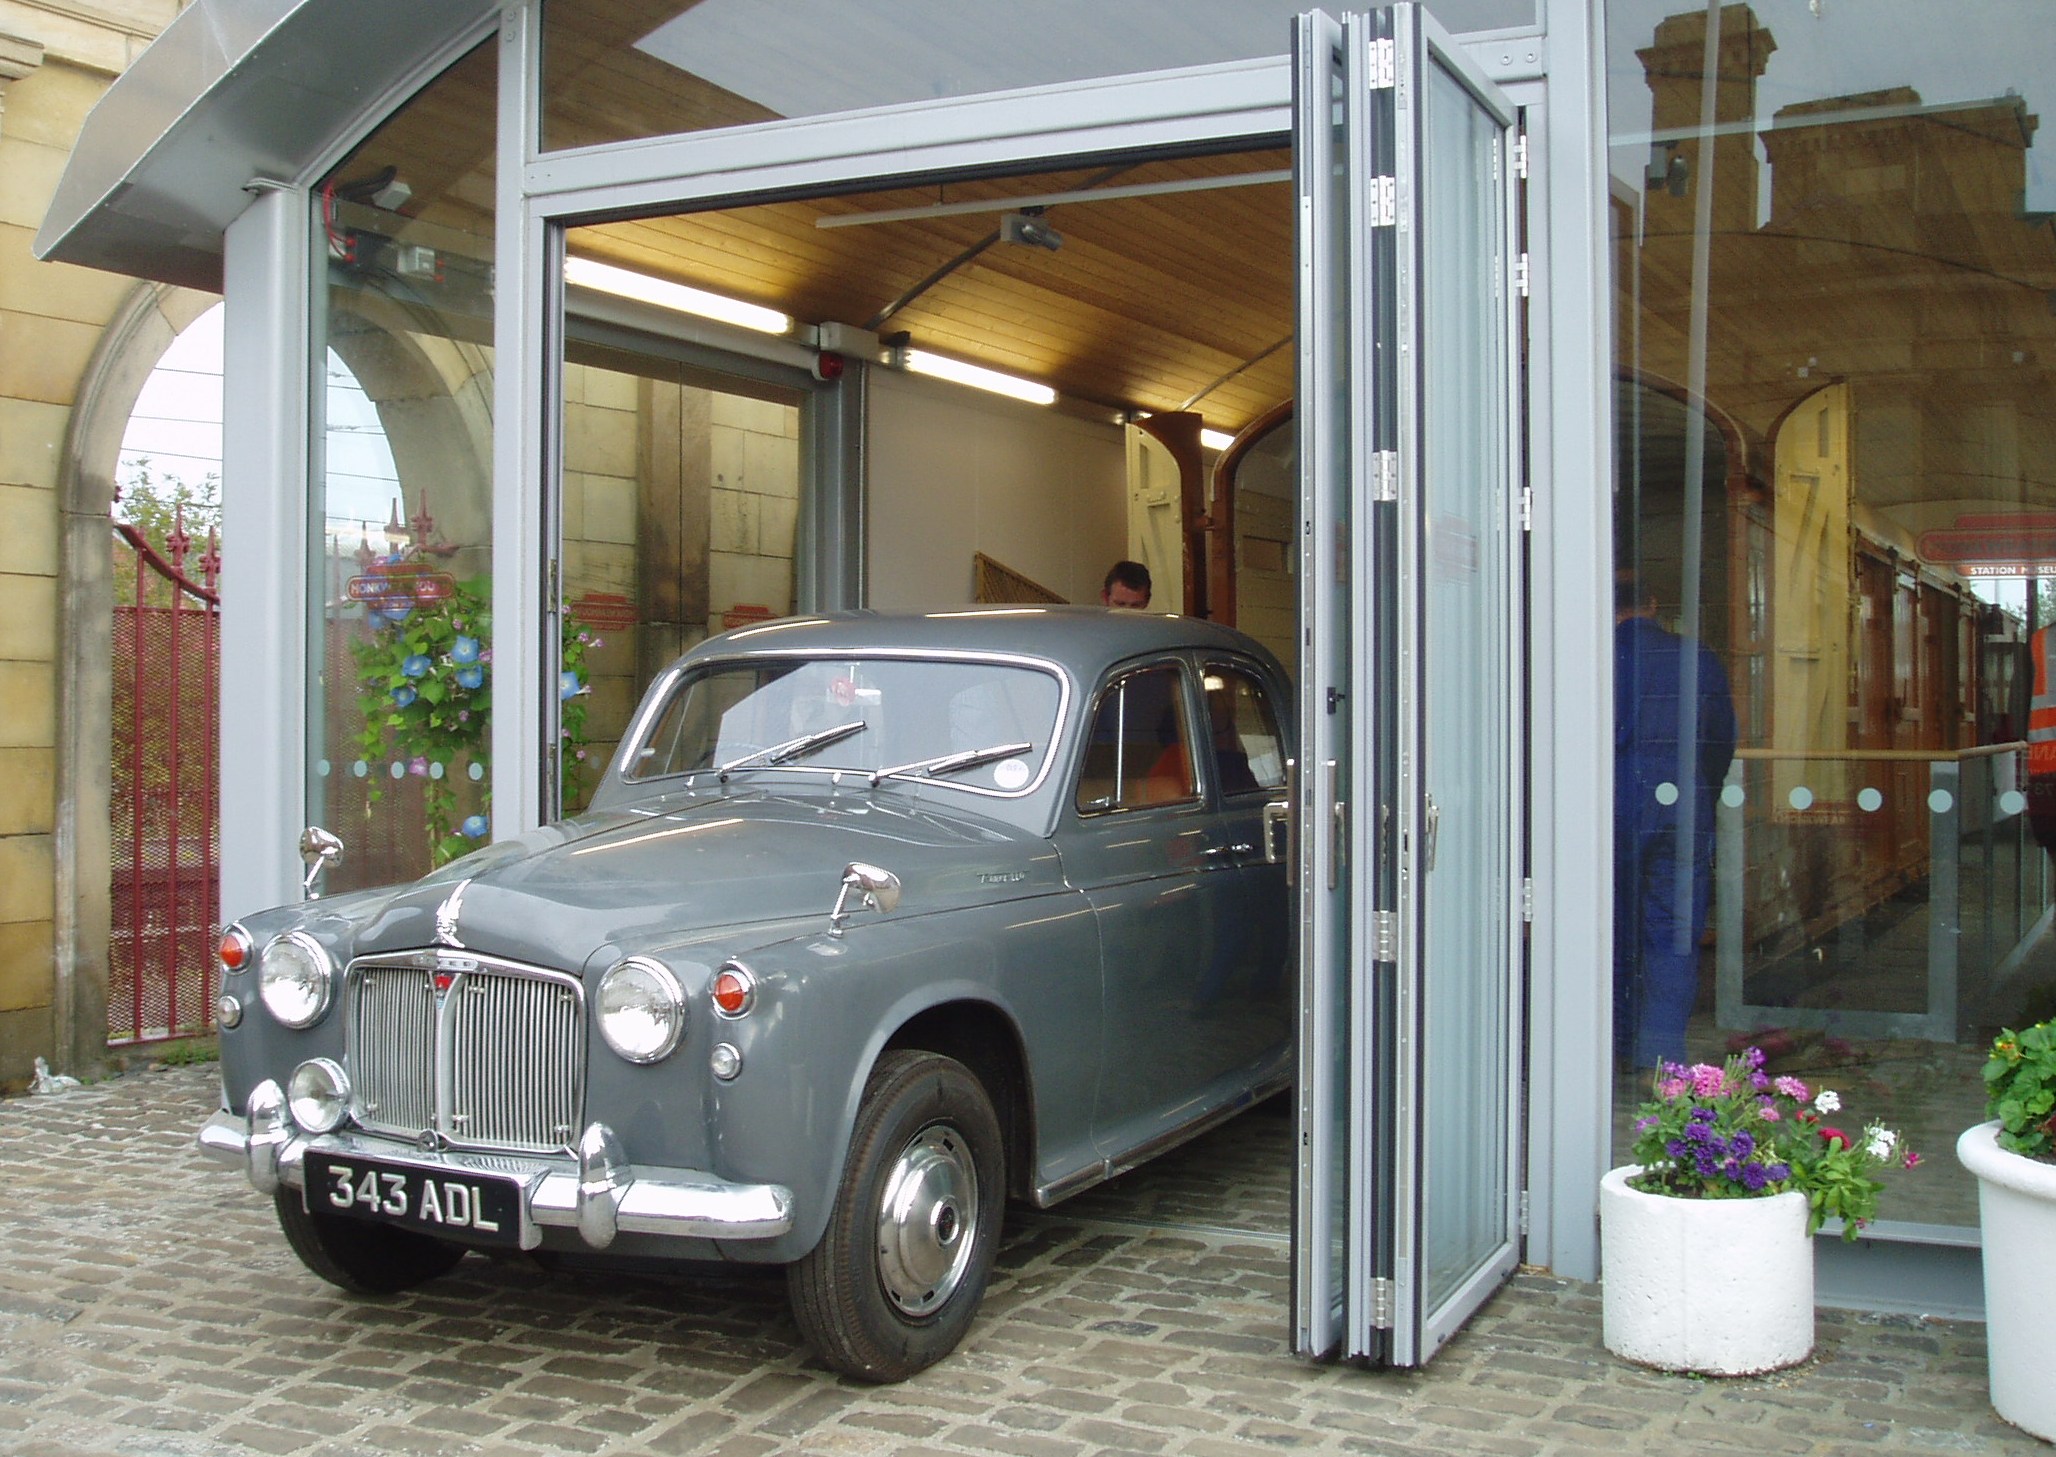 After checking its condition the car is pushed to the ramp through the folding doors that were designed into the building with this type of operation in mind.